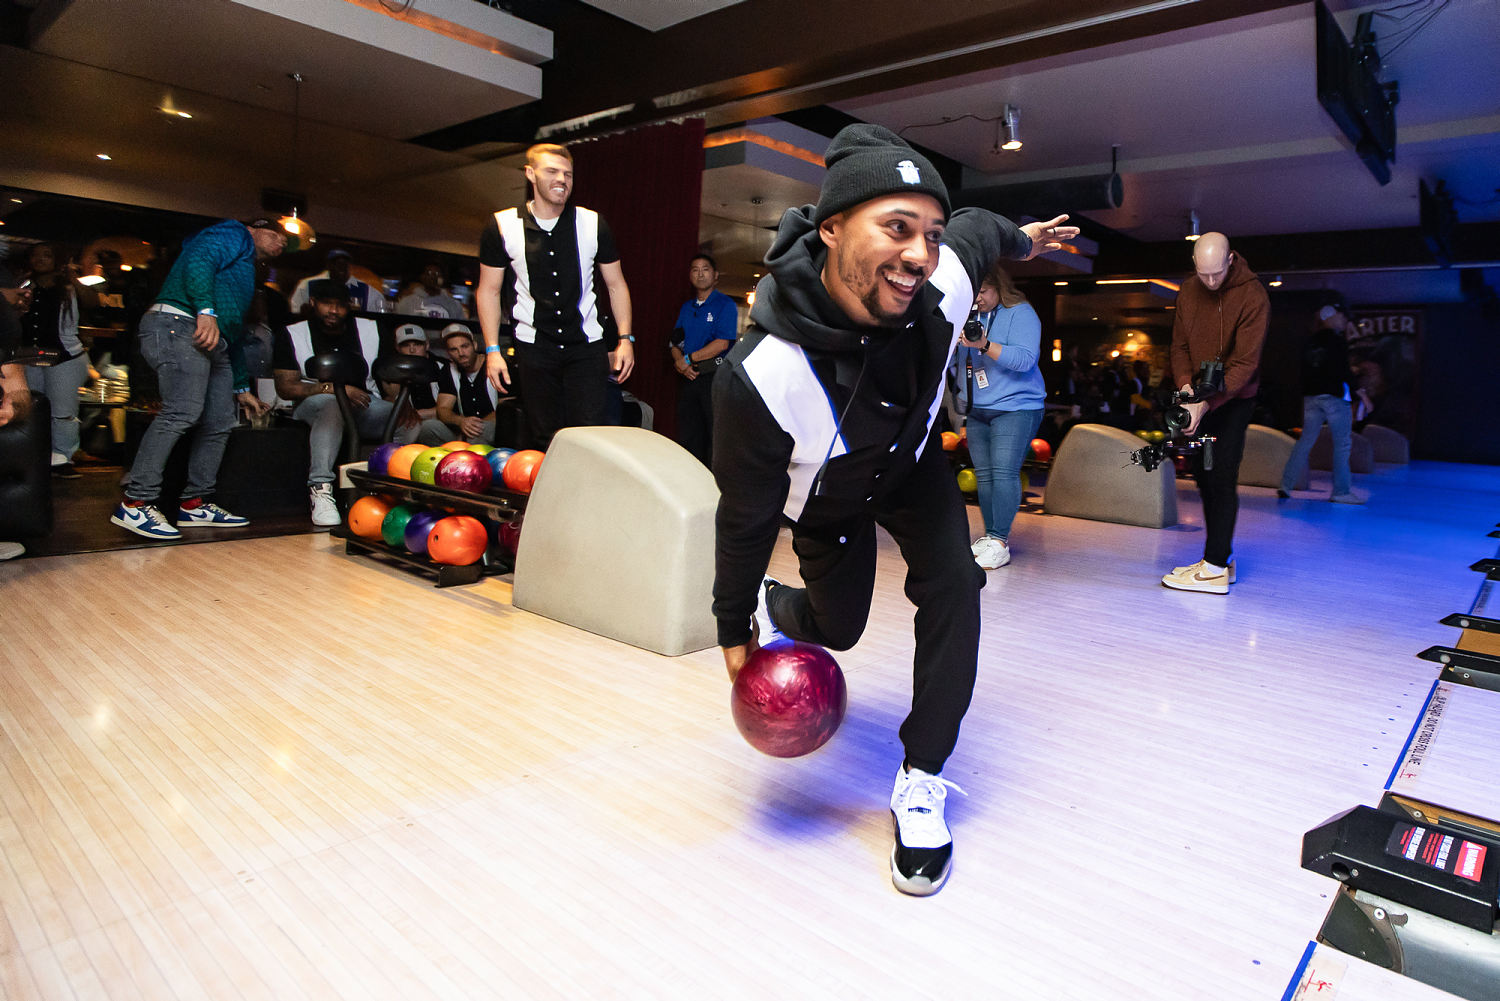 Mookie Betts, Los Angeles Dodgers star, describes how his passion for bowling led to baseball success